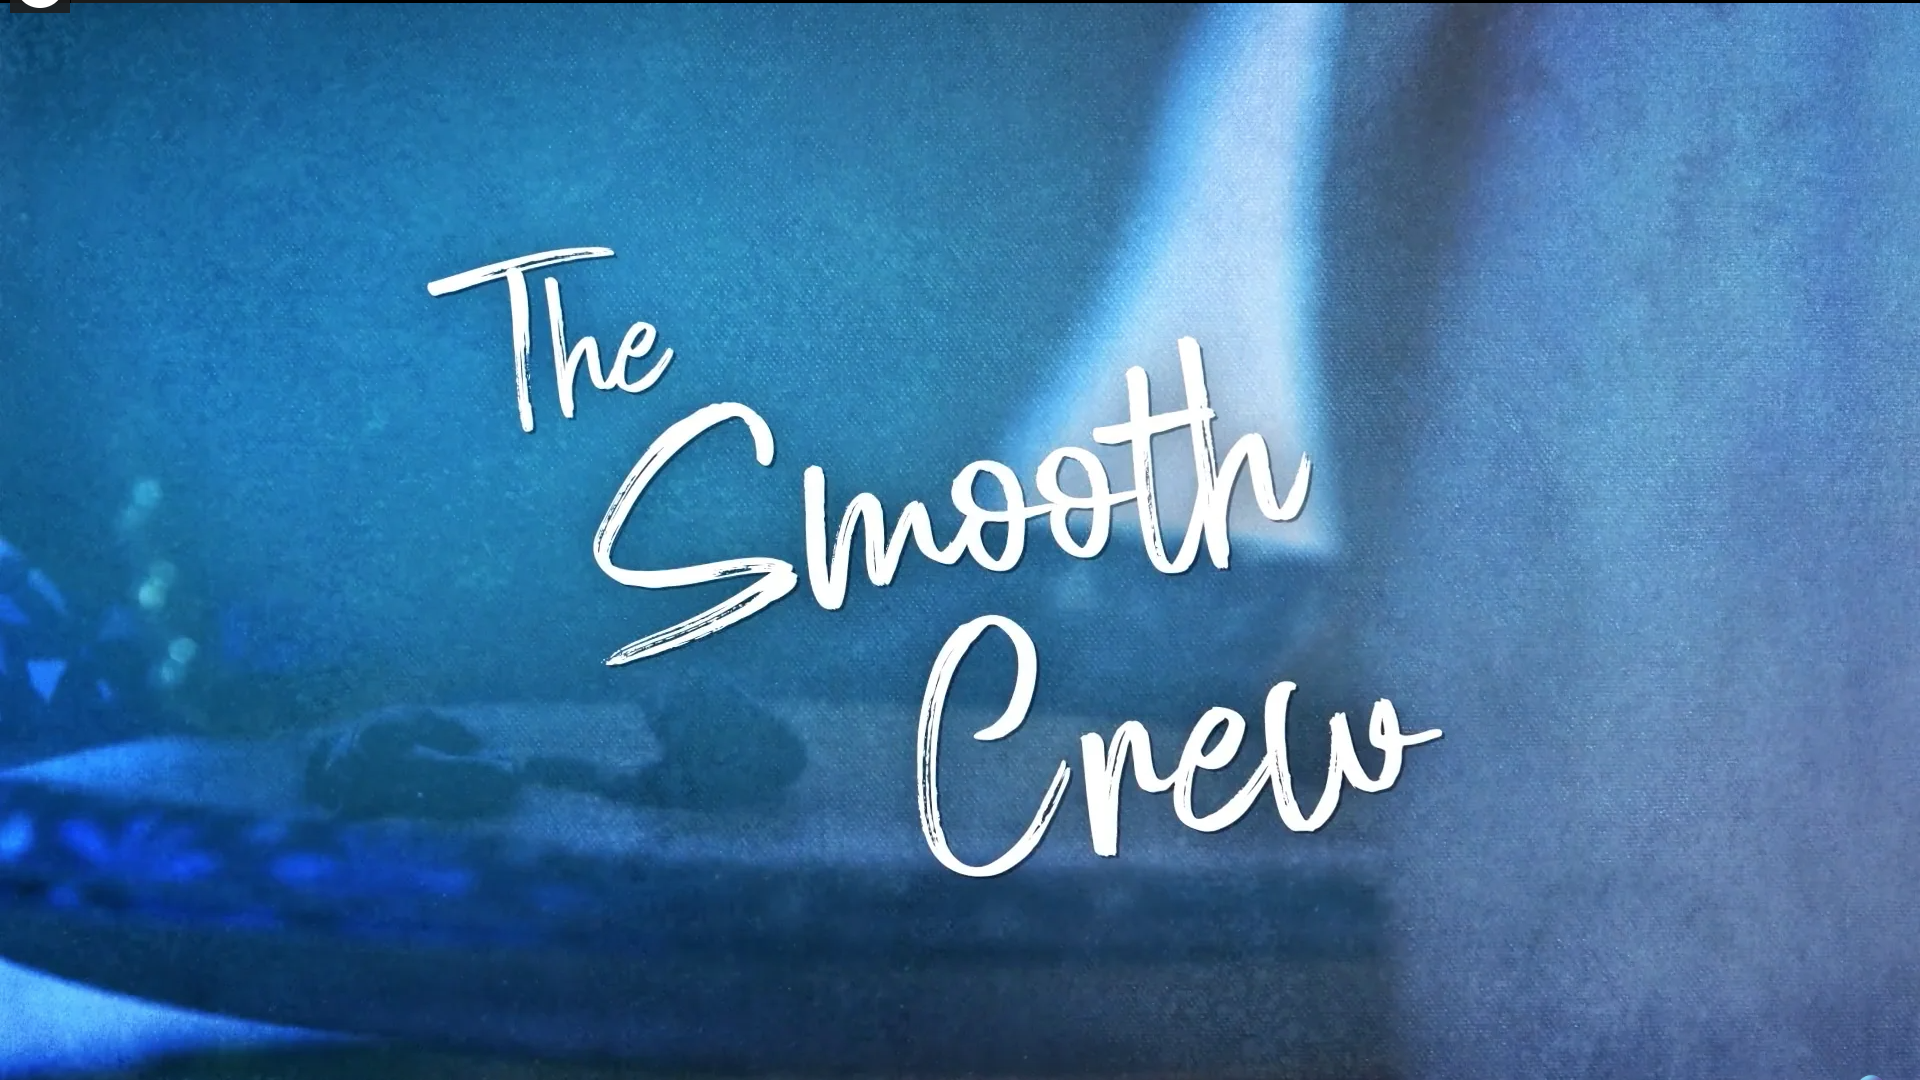 Text: The Smooth Crew with a blue background